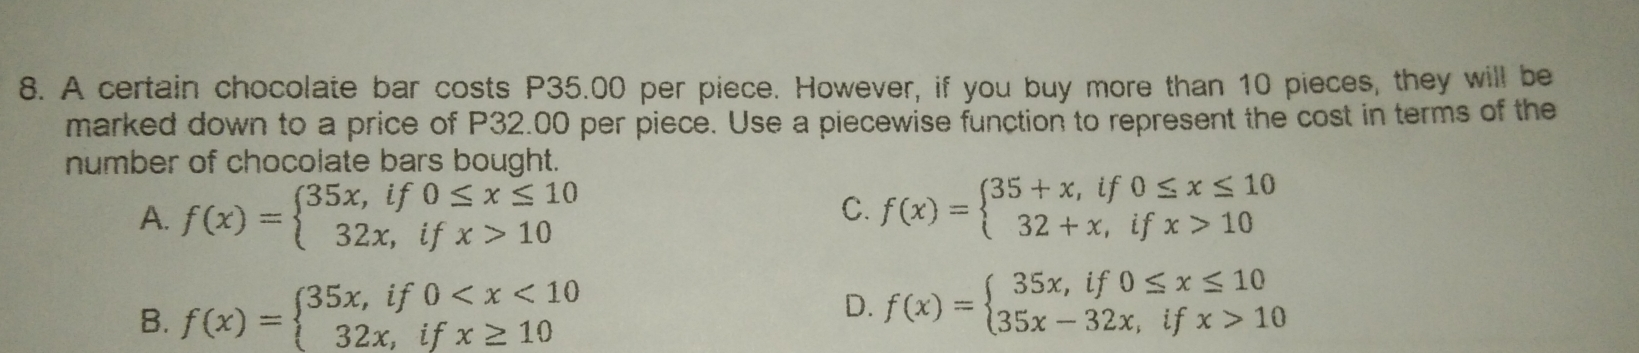 8. A certain chocolate bar costs P35.00 per piece. However, if you buy more than 10 pieces, they will be marked down to a price of P32.00 per piece. Use a piecewise function to represent the cost in terms of the number of chocolate bars bought A. fx= ≤ ftbeginarrayl 35x,if0 ≤ q x ≤ q 10 32x,ifx>10endarray . C. fx= ≤ ftbeginarrayl 35+x,if0 ≤ q x ≤ q 10 32+x,ifx>10endarray . 8. fx= ≤ ftbeginarrayl 35x,if0